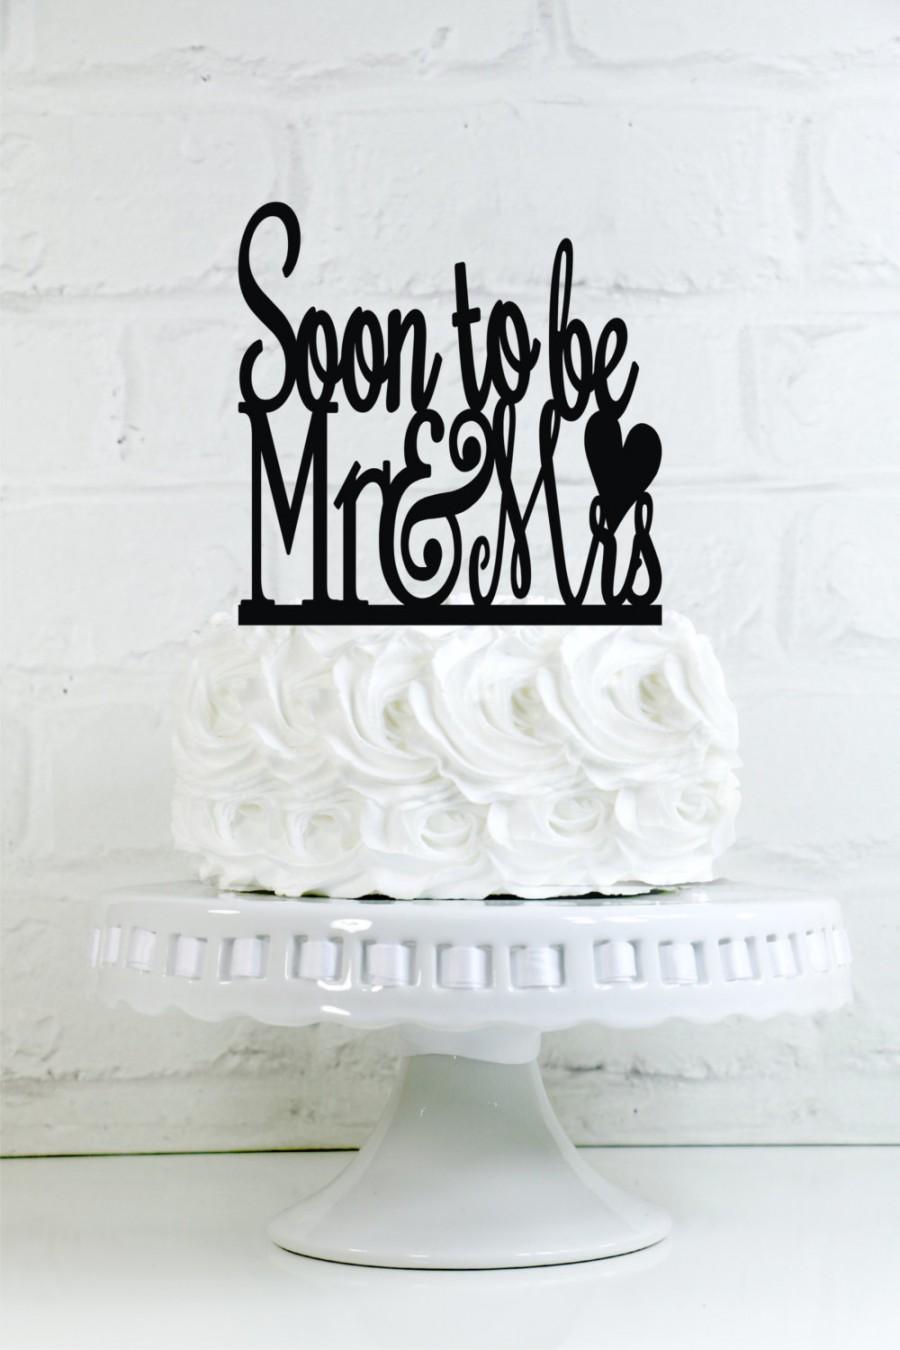 Hochzeit - Soon to be Mr and Mrs Engagement Party Cake Topper or Sign with a heart